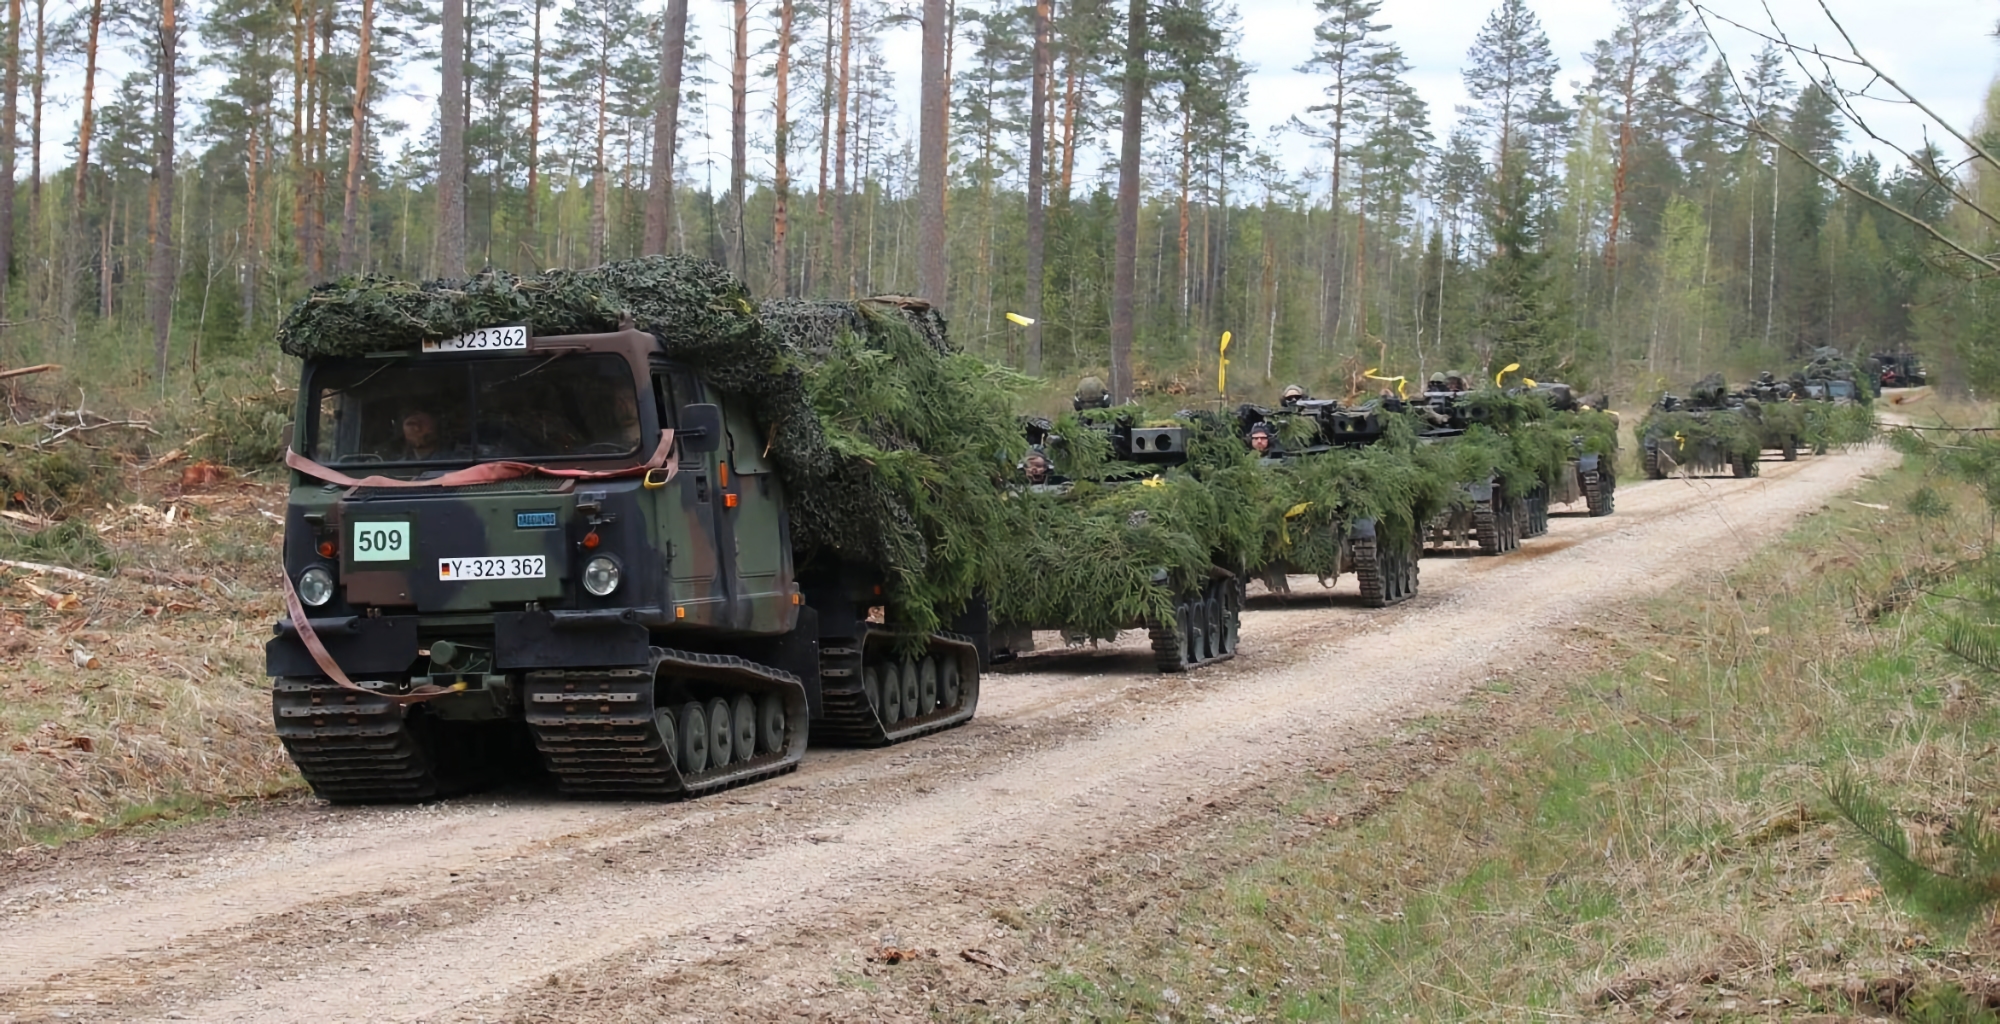 Germany sends new military aid package to Ukraine that includes Bandvagn 206 all-terrain vehicles and other weapons